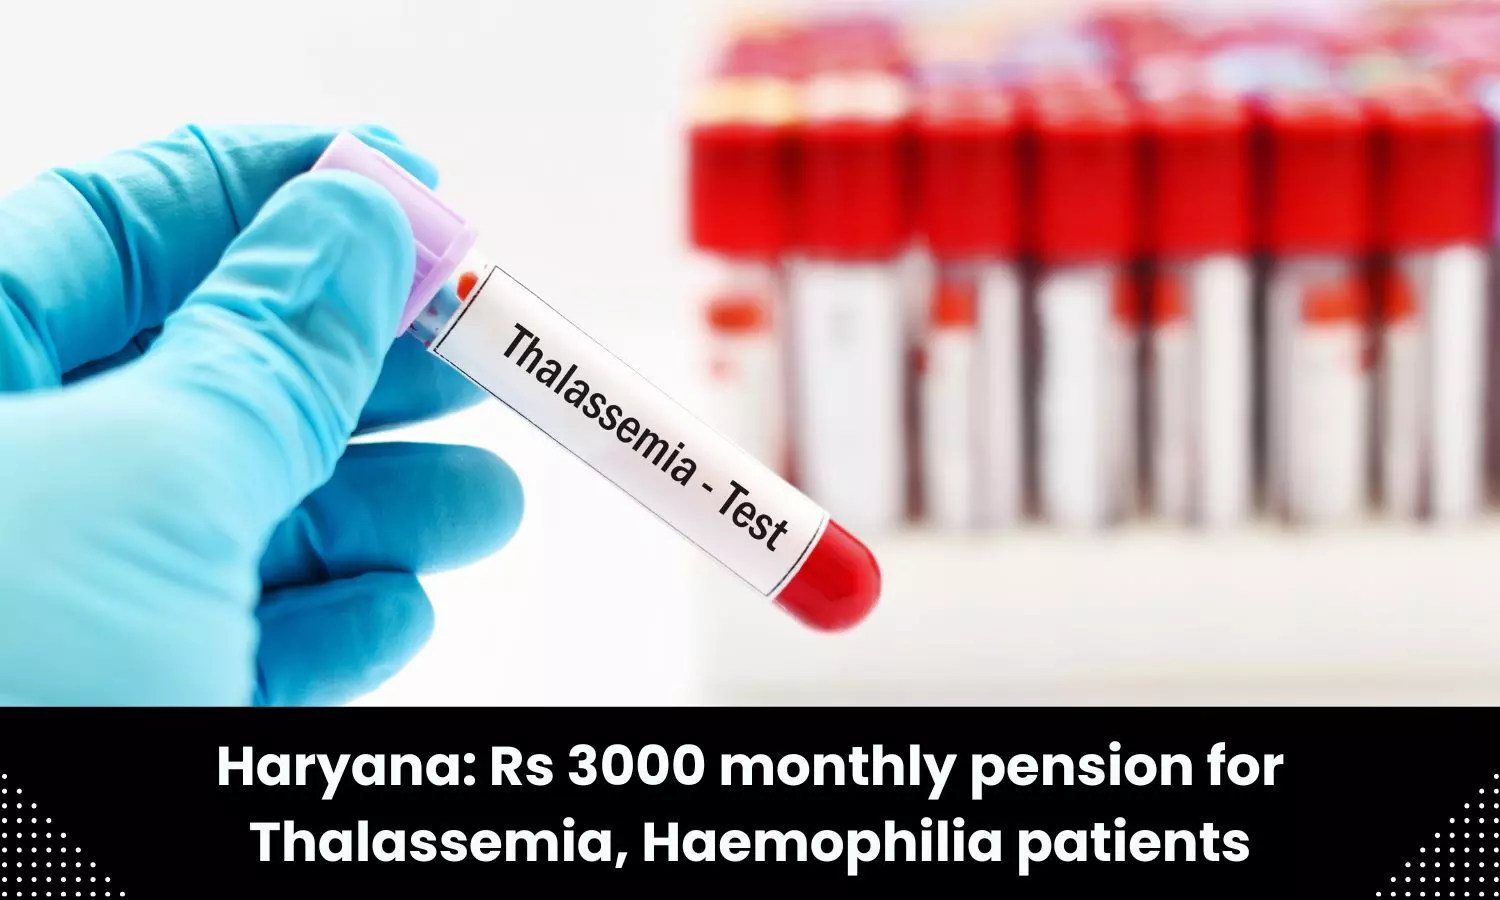 Patients of Thalassemia, Haemophilia in Haryana to get Rs 3000 monthly pension